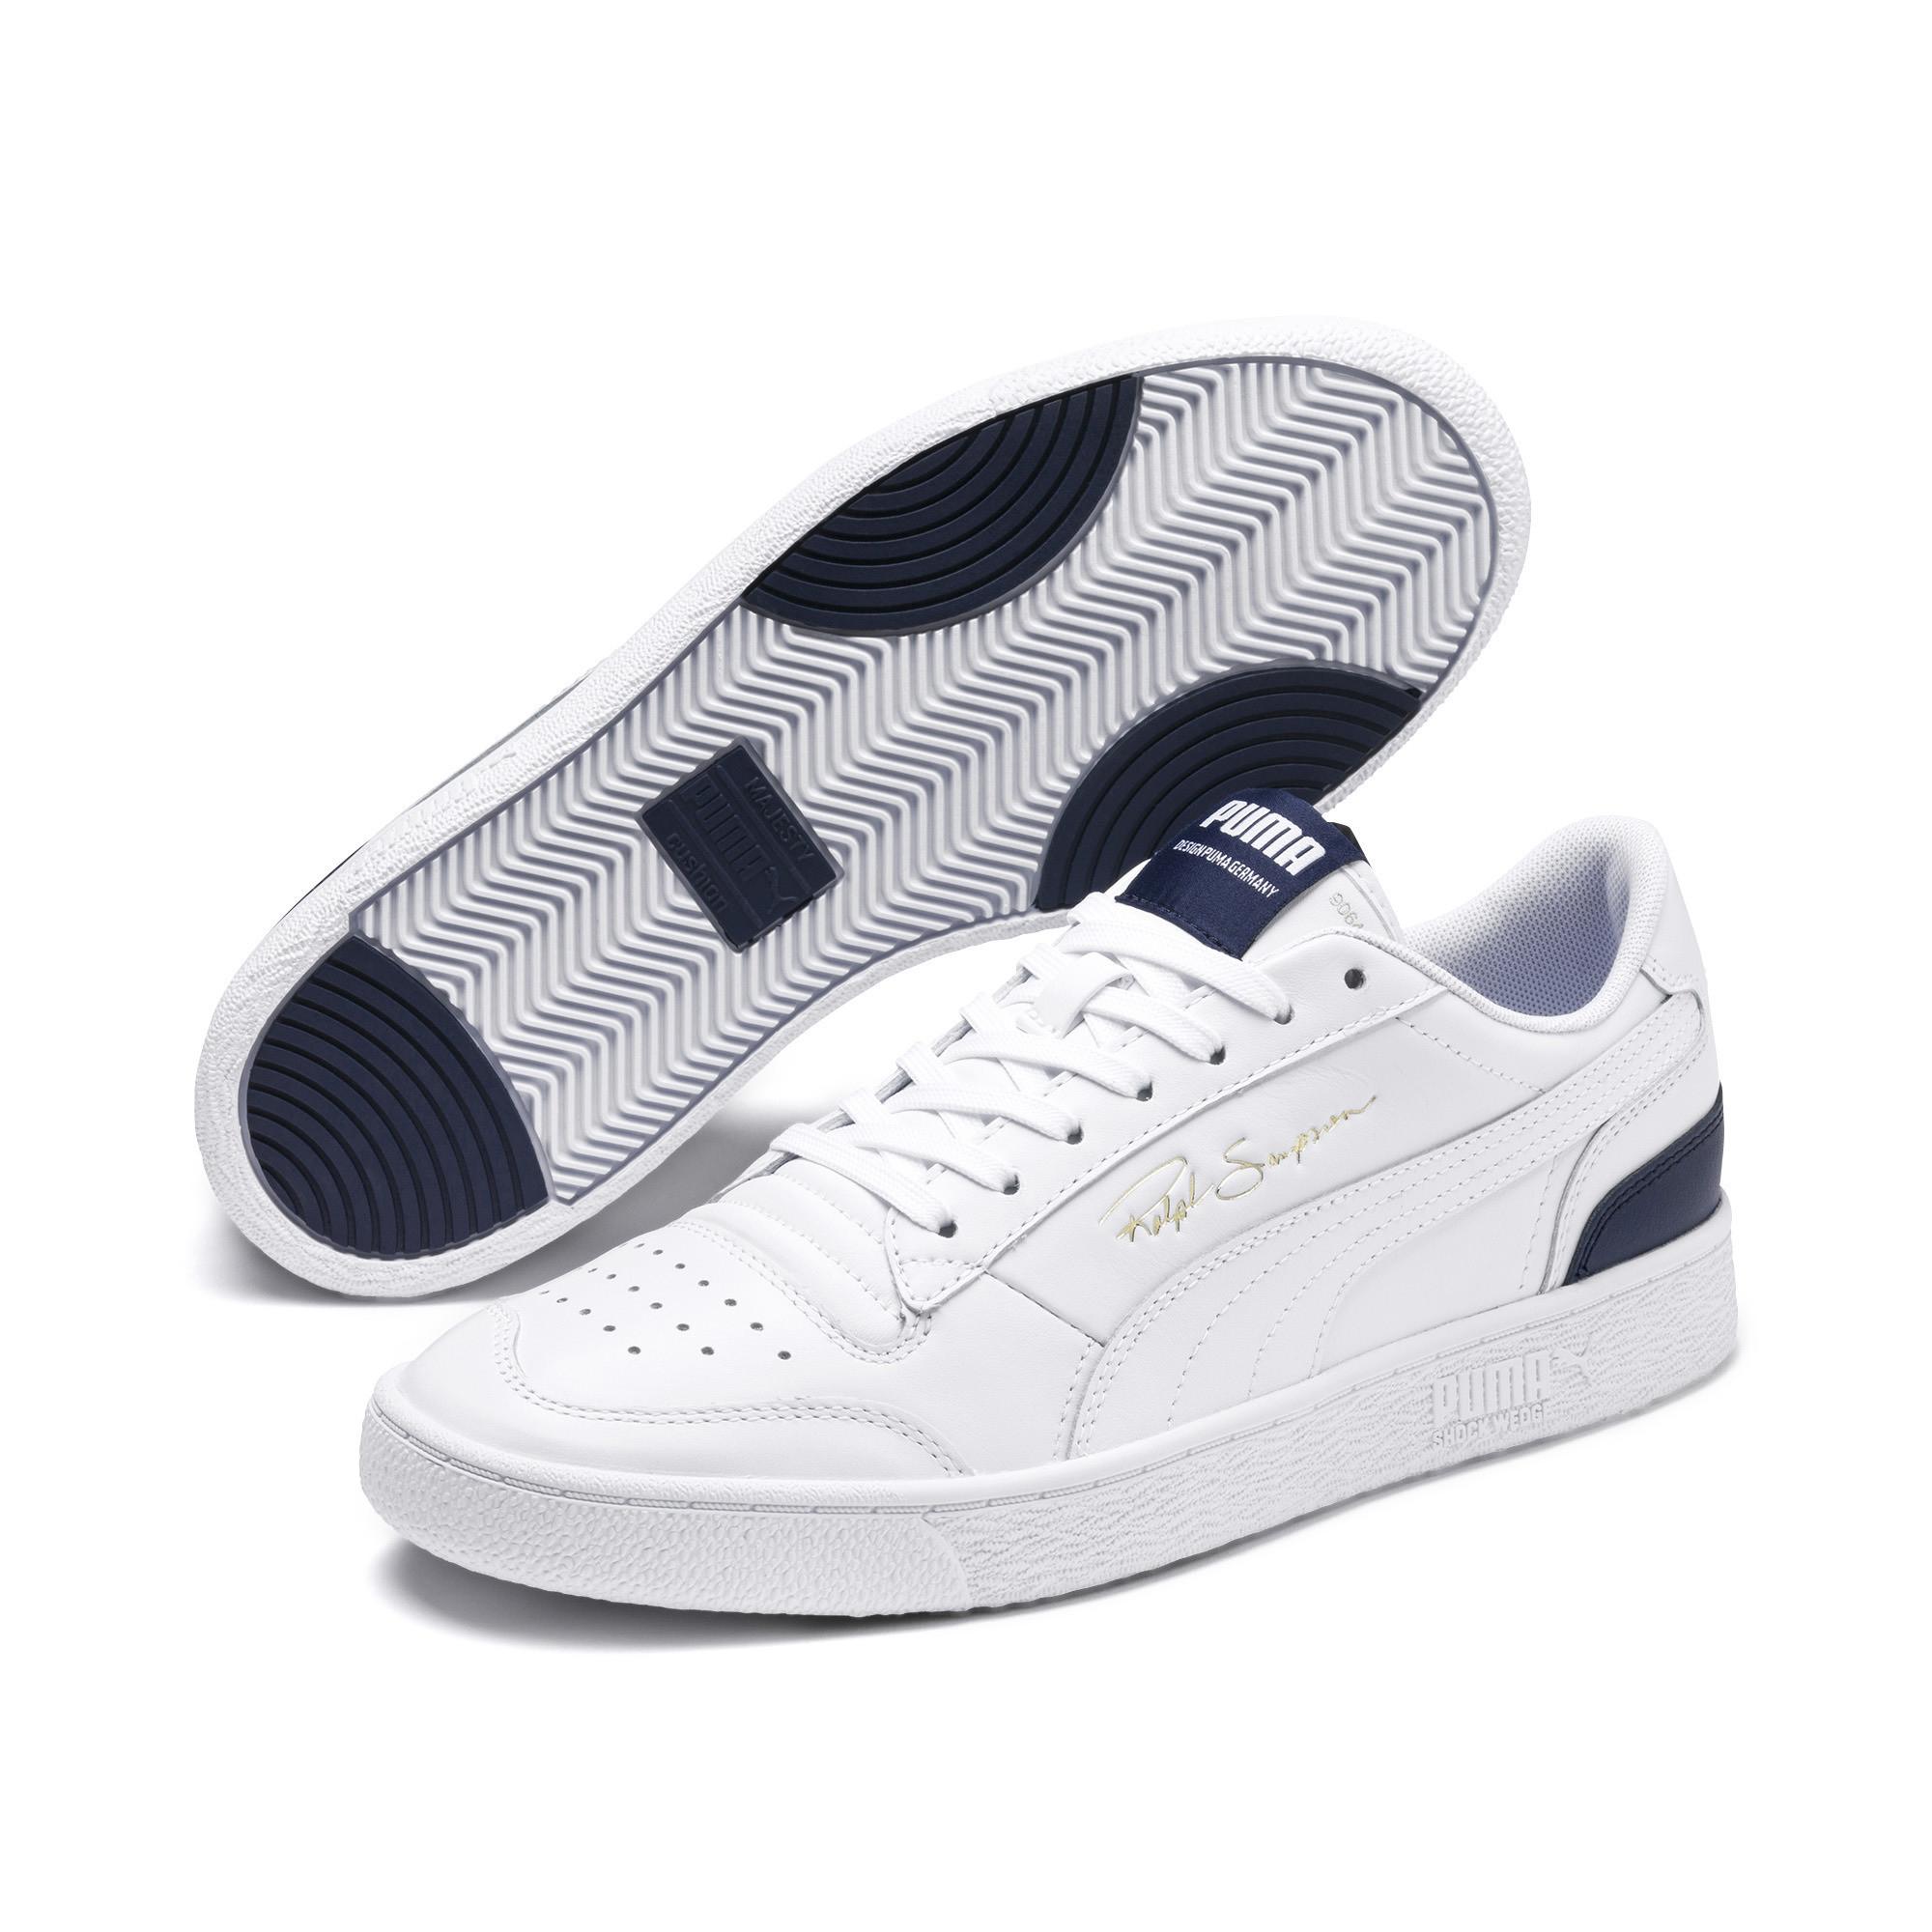 PUMA Leather Ralph Sampson Lo Sneakers in 02 (White) for Men - Lyst